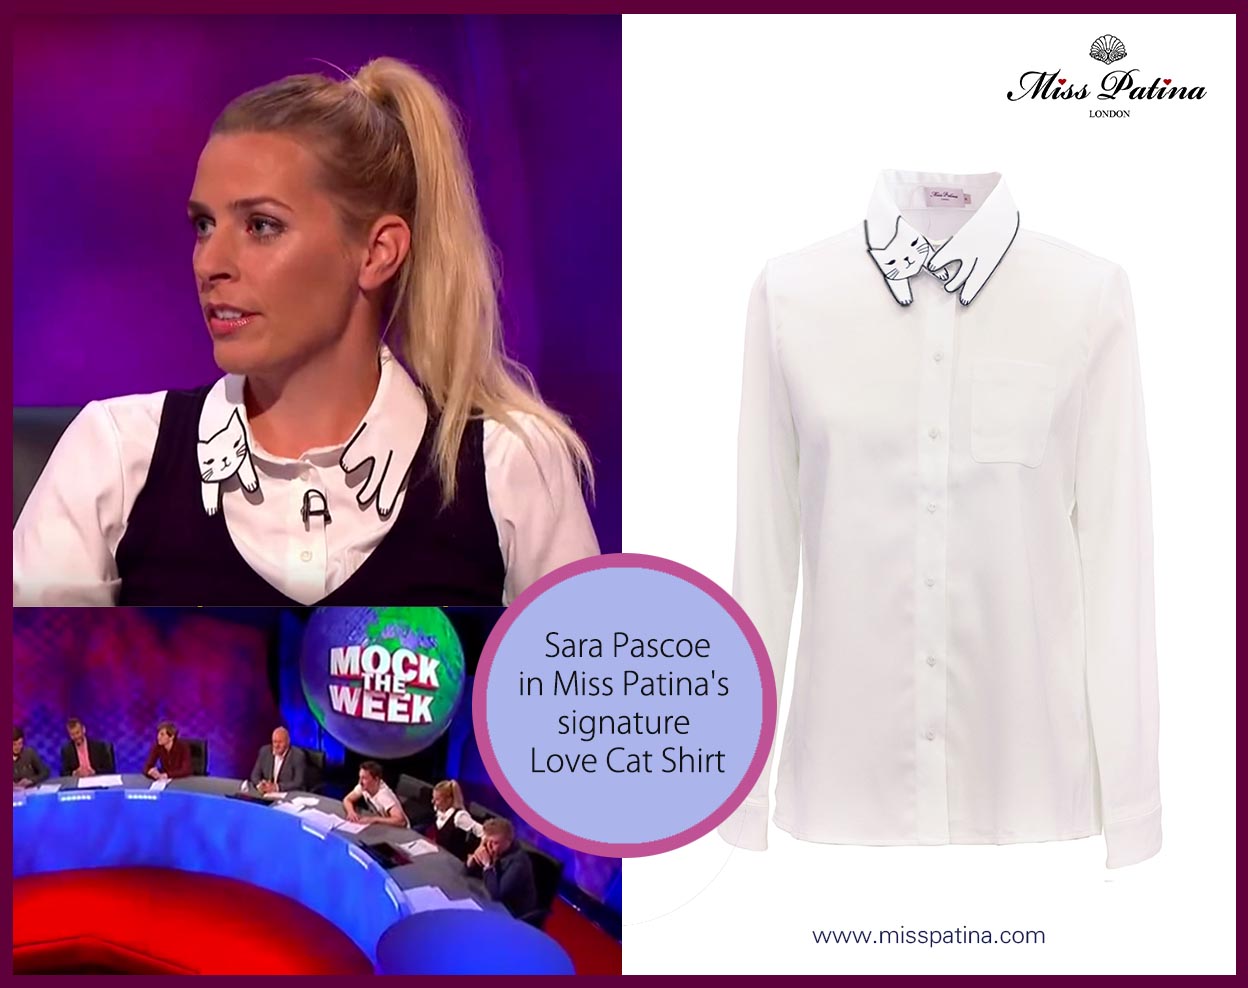 Spotted: Actress Sara Pascoe in Miss Patina!